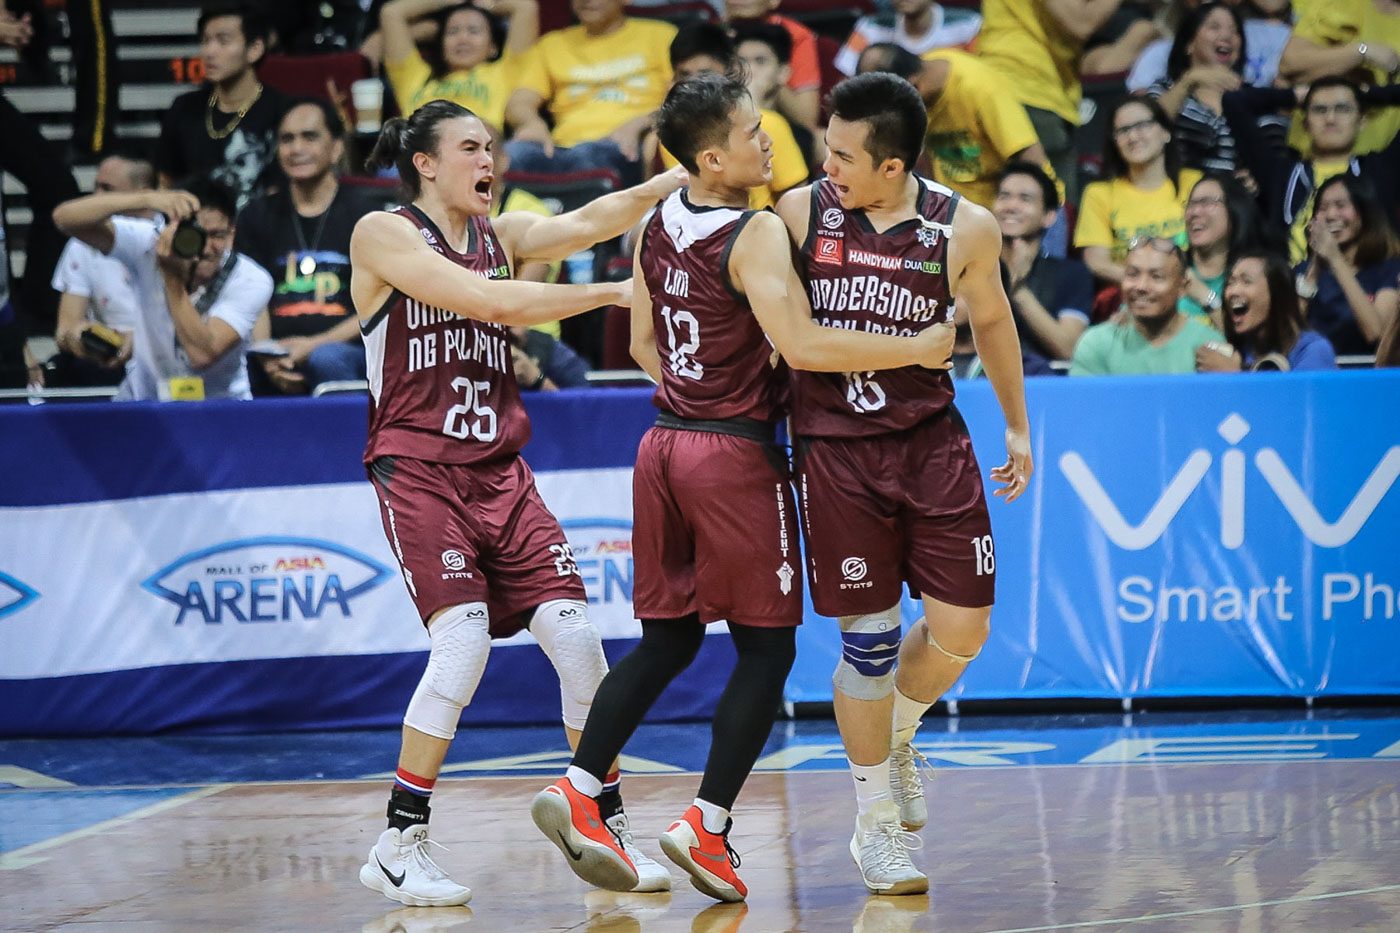 Late Desiderio 3-pointer gives UP opening win over UST